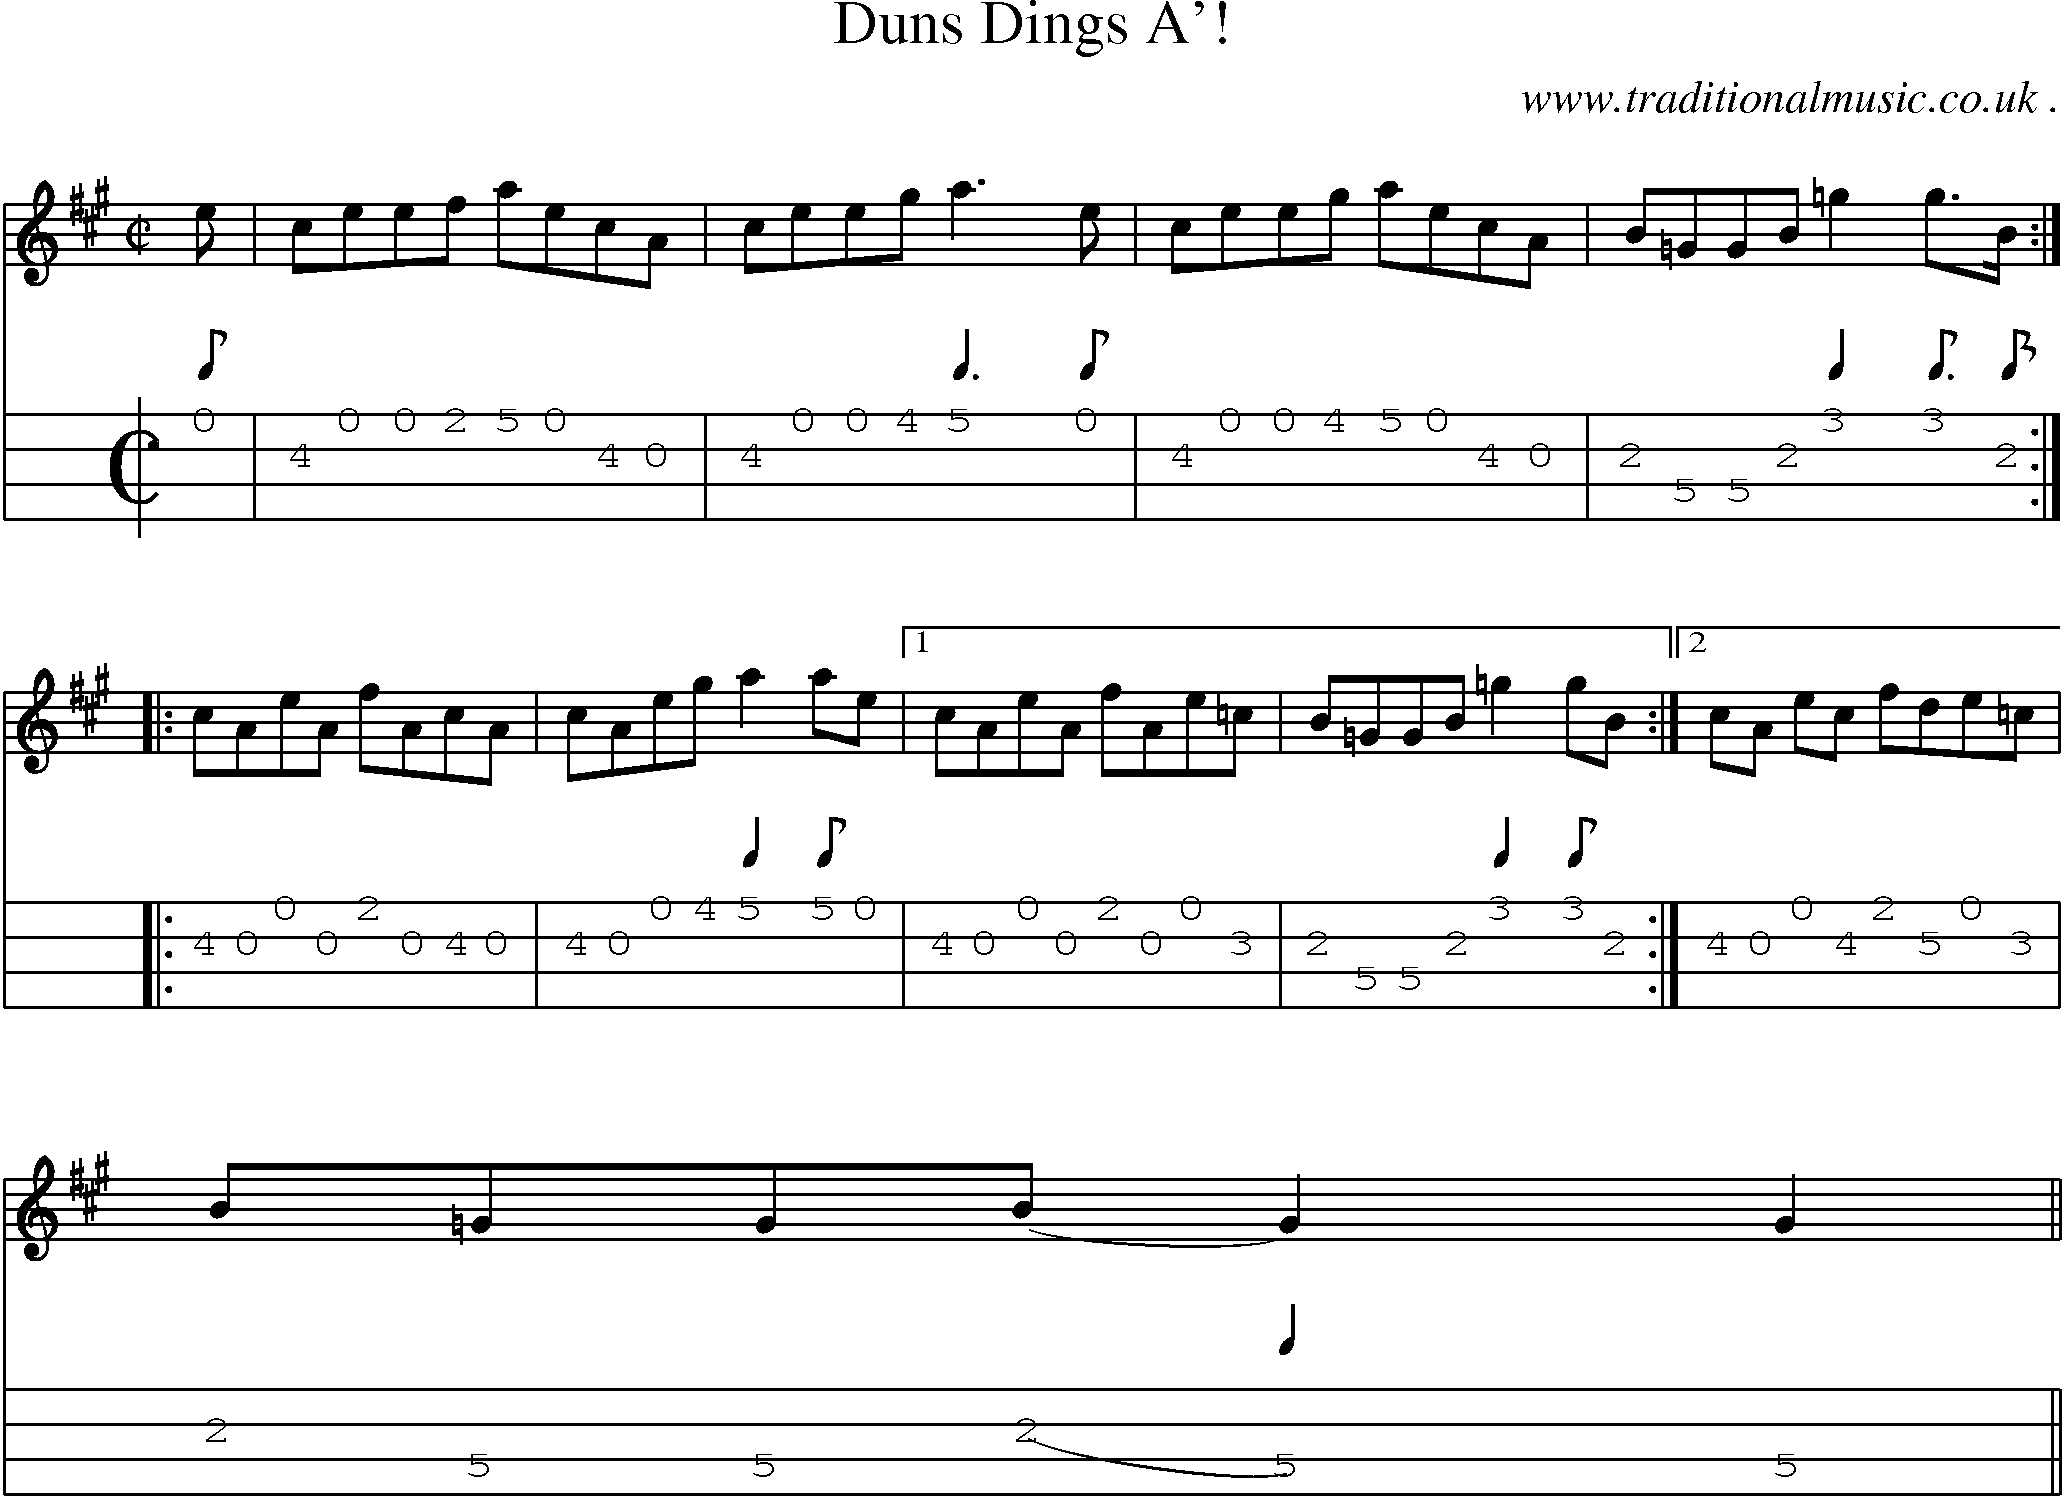 Sheet-music  score, Chords and Mandolin Tabs for Duns Dings A!